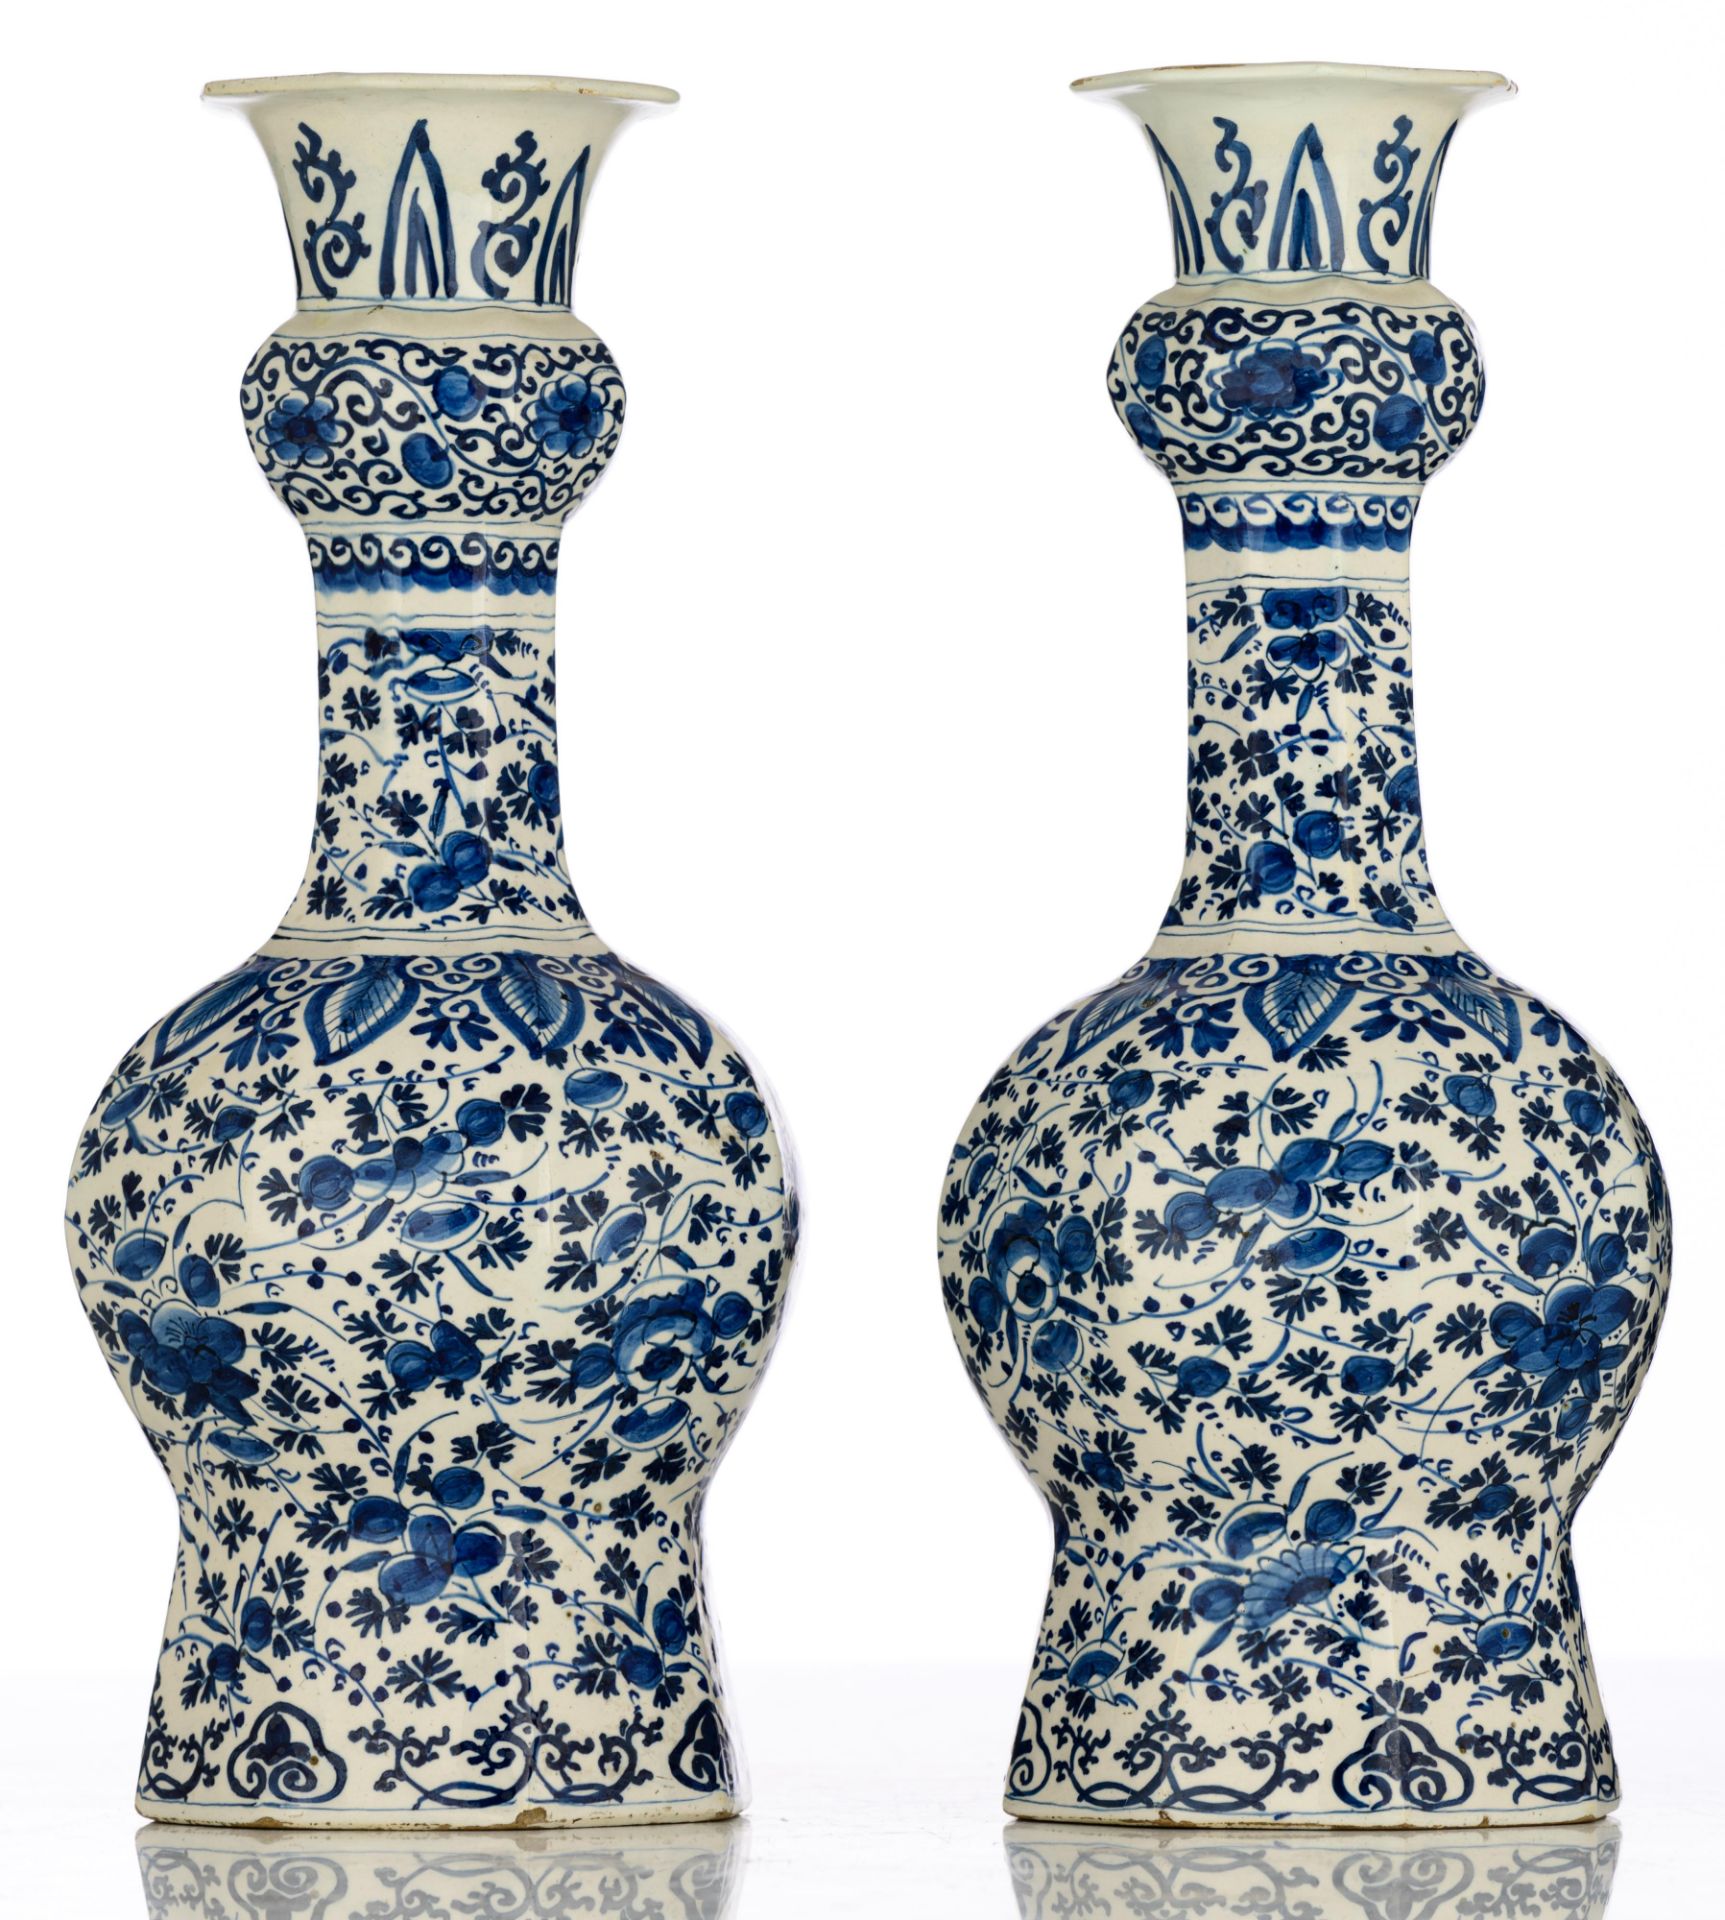 A pair of blue and white floral decorated Dutch Delftware garlic bottle vases, 18thC, H 37 cm. Added - Bild 2 aus 17